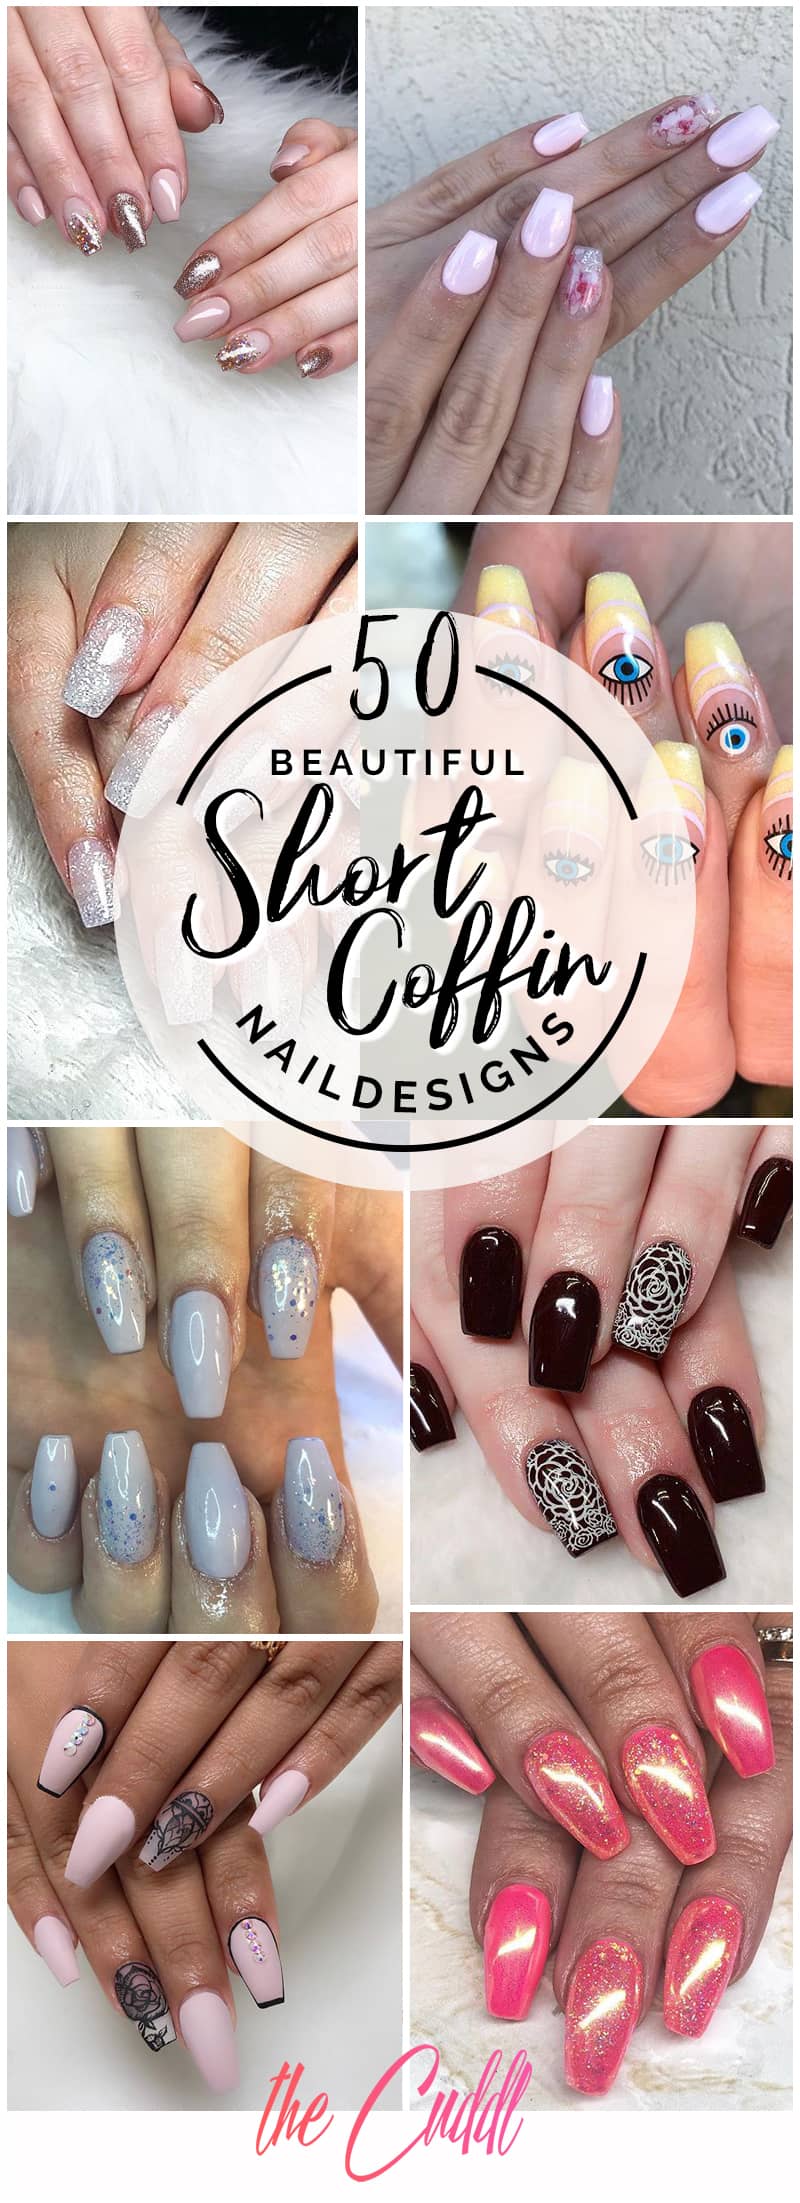 50 Beautiful Short Coffin Nails to Boost Your Style